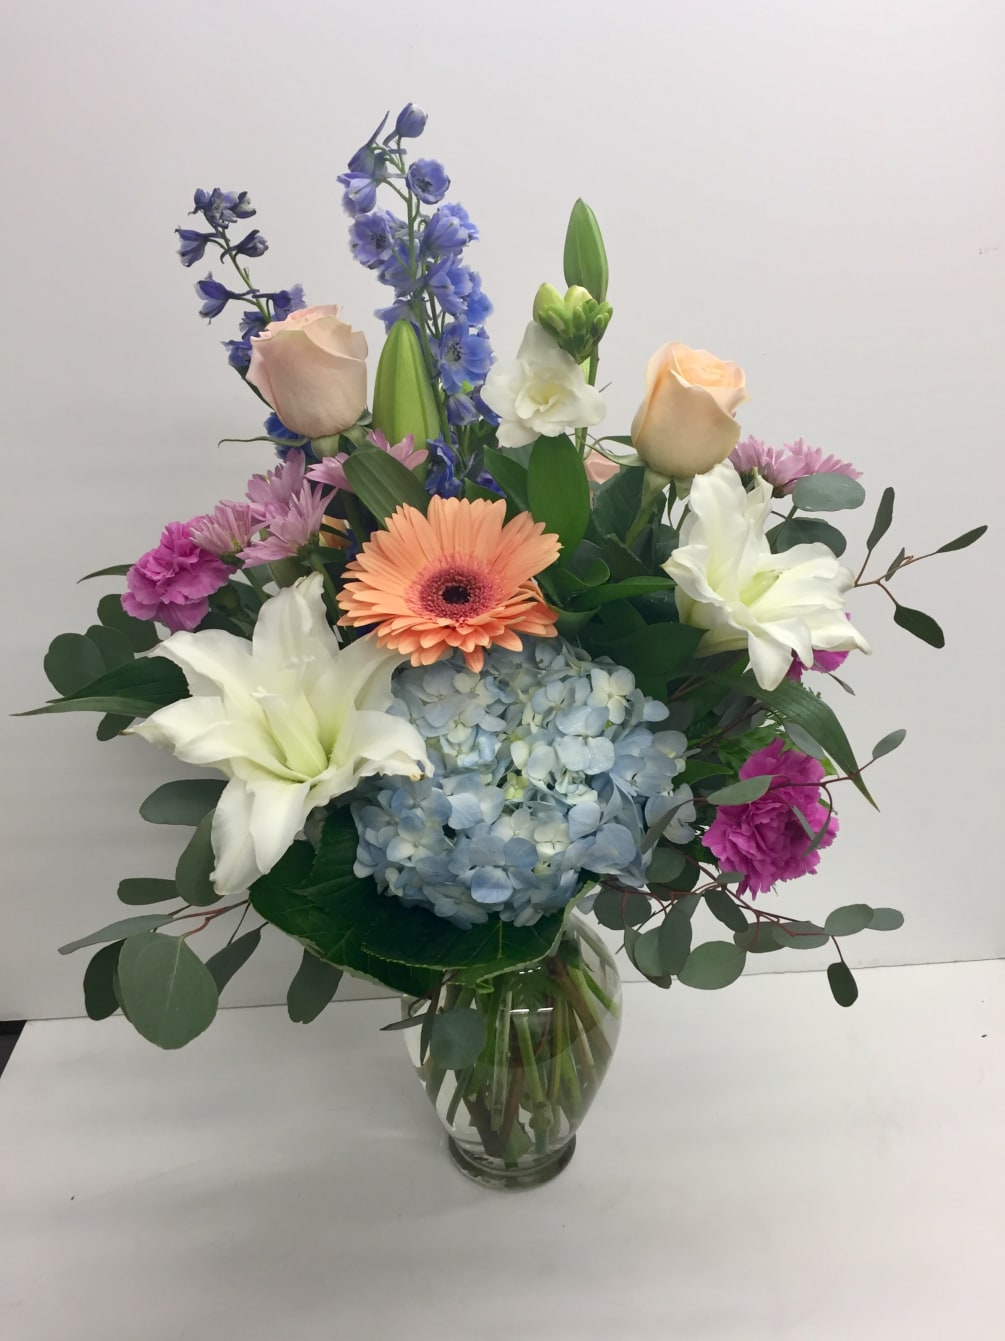 Vase of peach gerbera daisies, roses, lilies and blue hydrangea